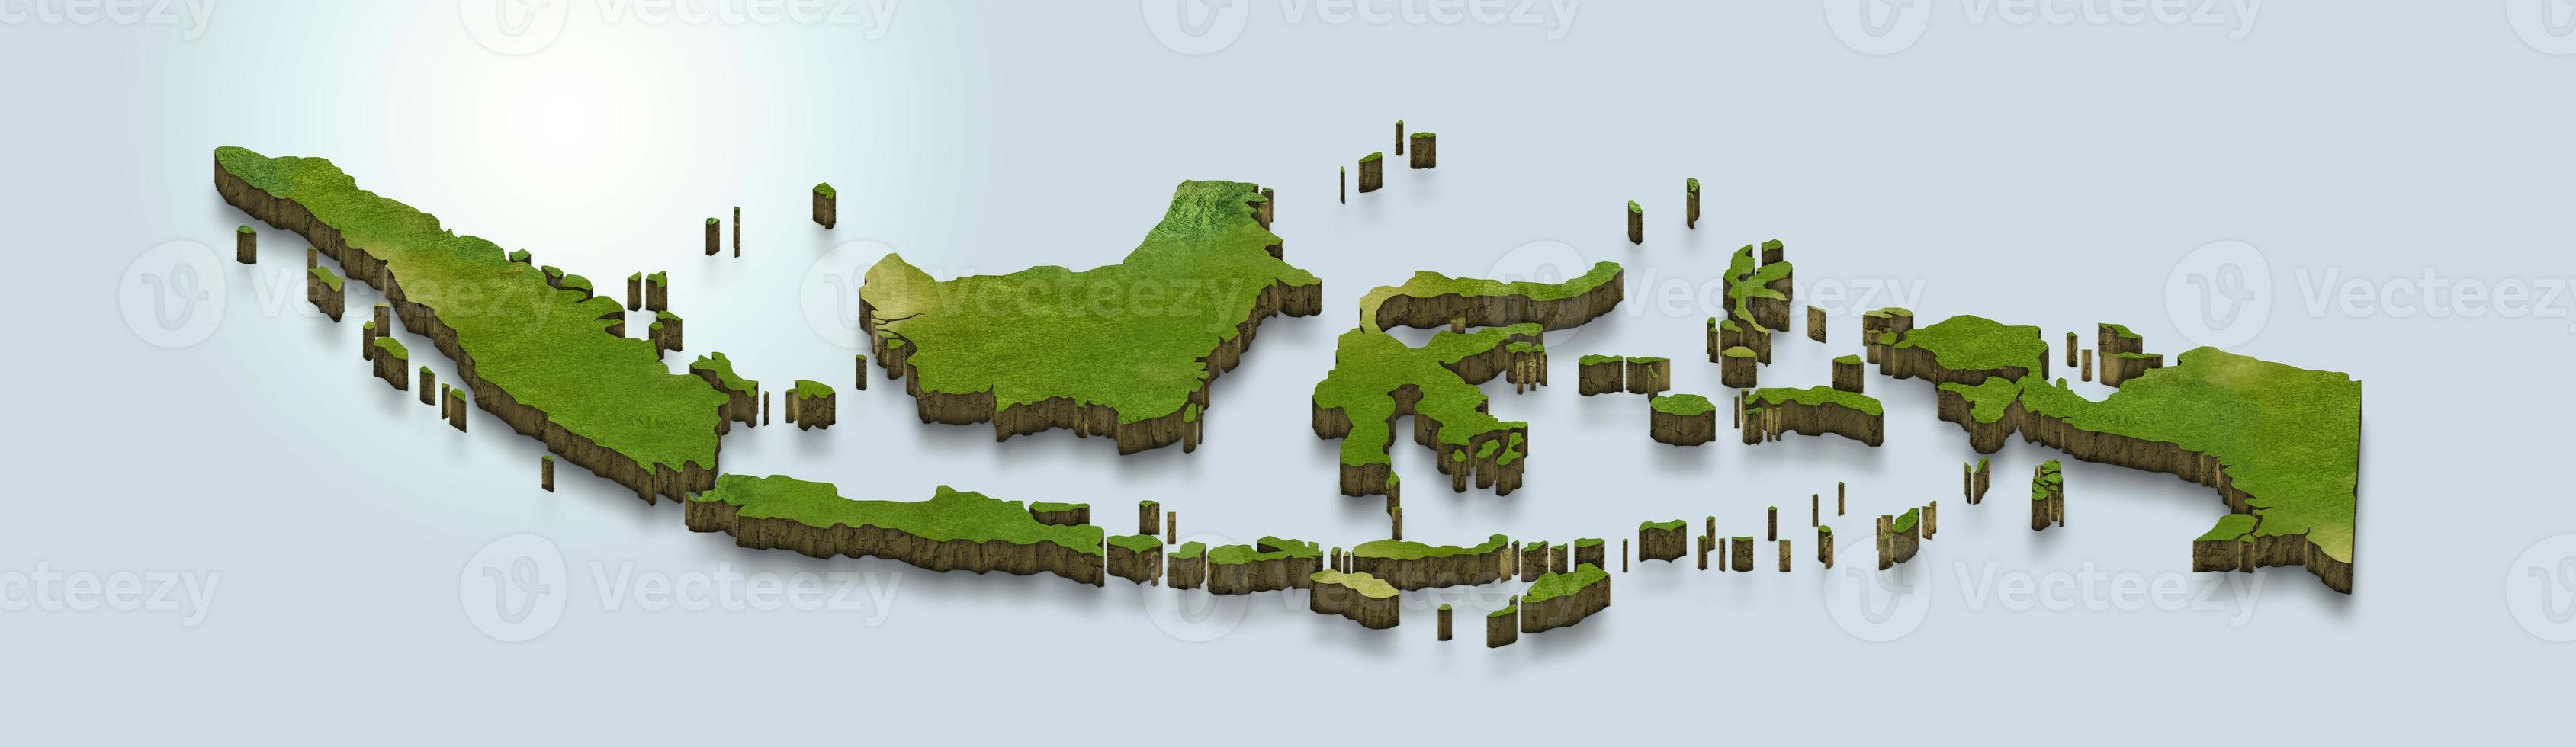 3D map illustration of indonesia photo